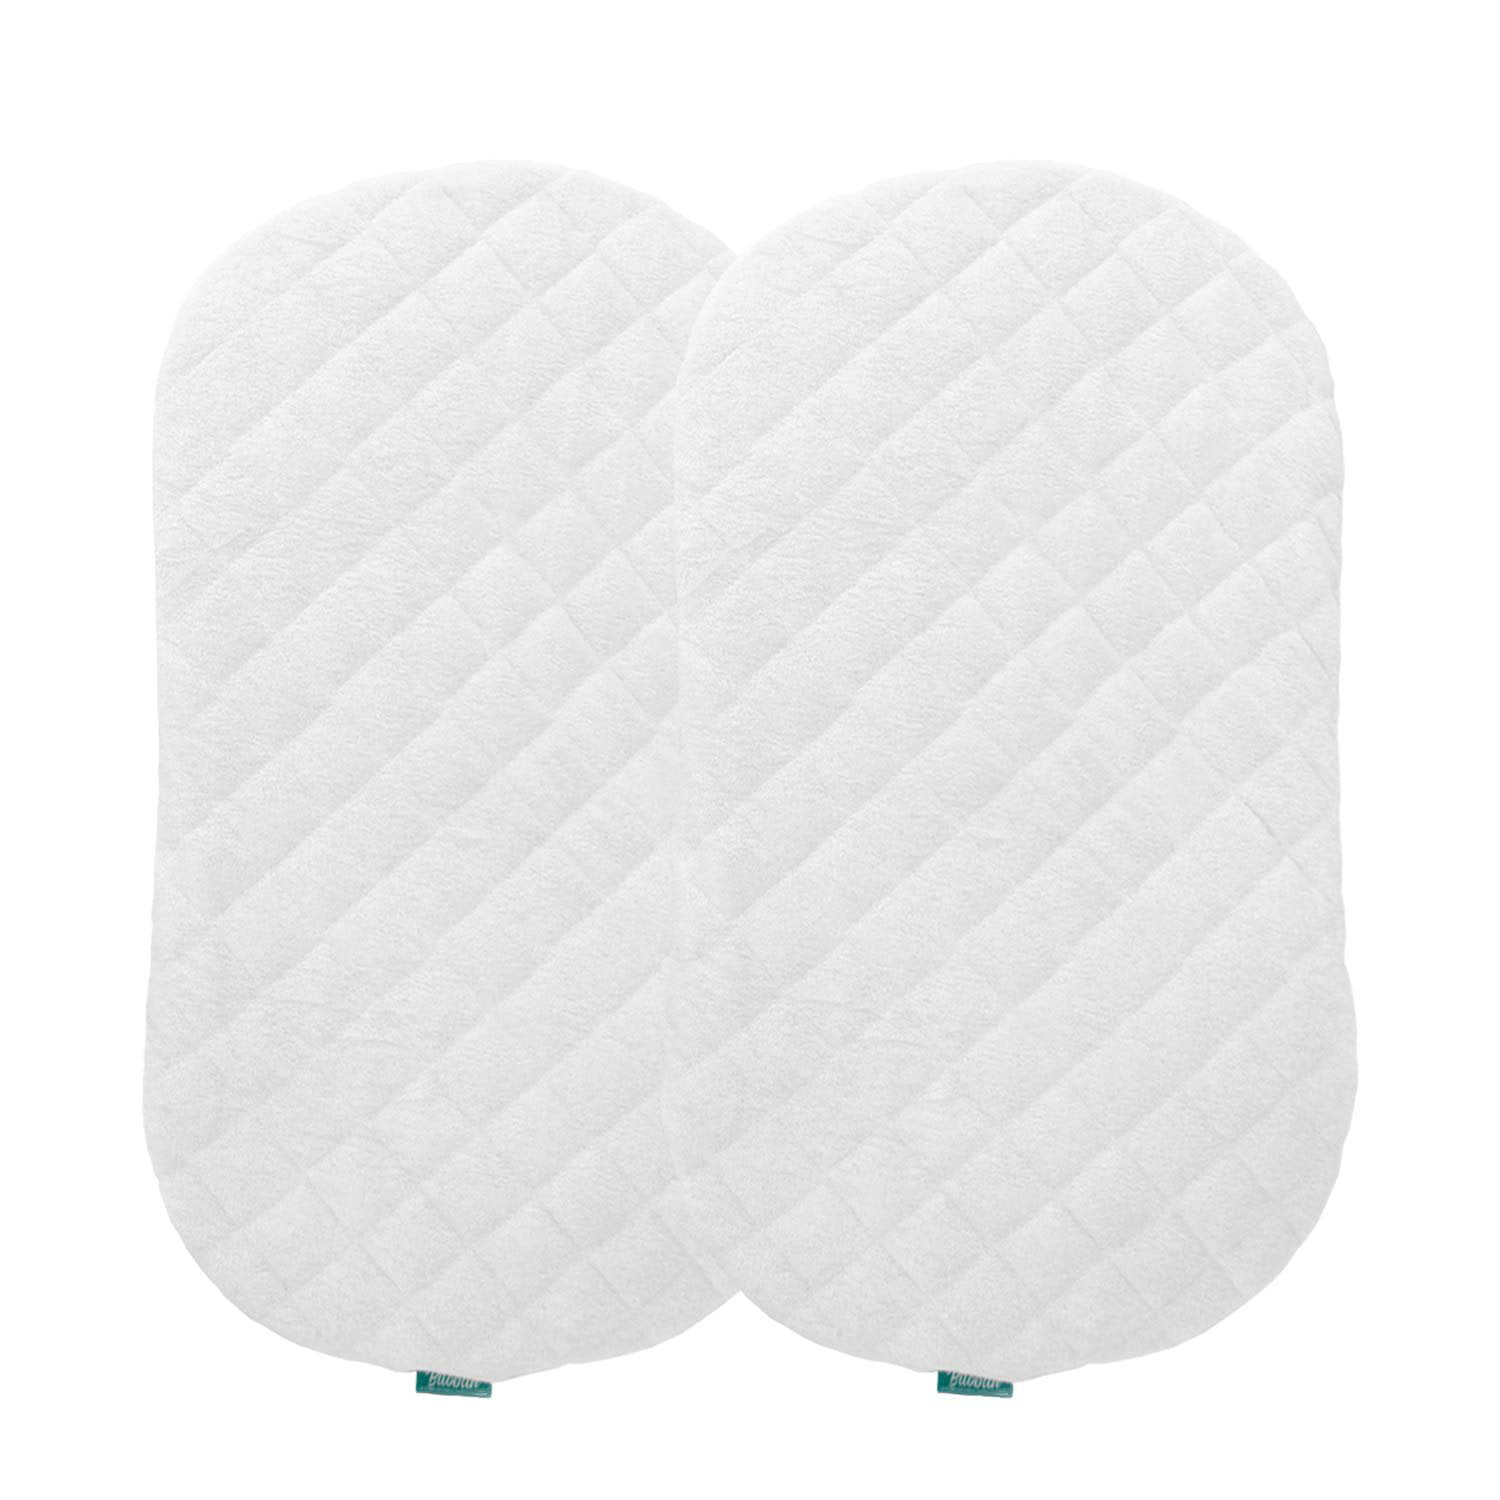 Details about   1.5-inch Pillowtop Mattress Pad Cotton Cover Hypoallergenic Gel Fiber Fill New